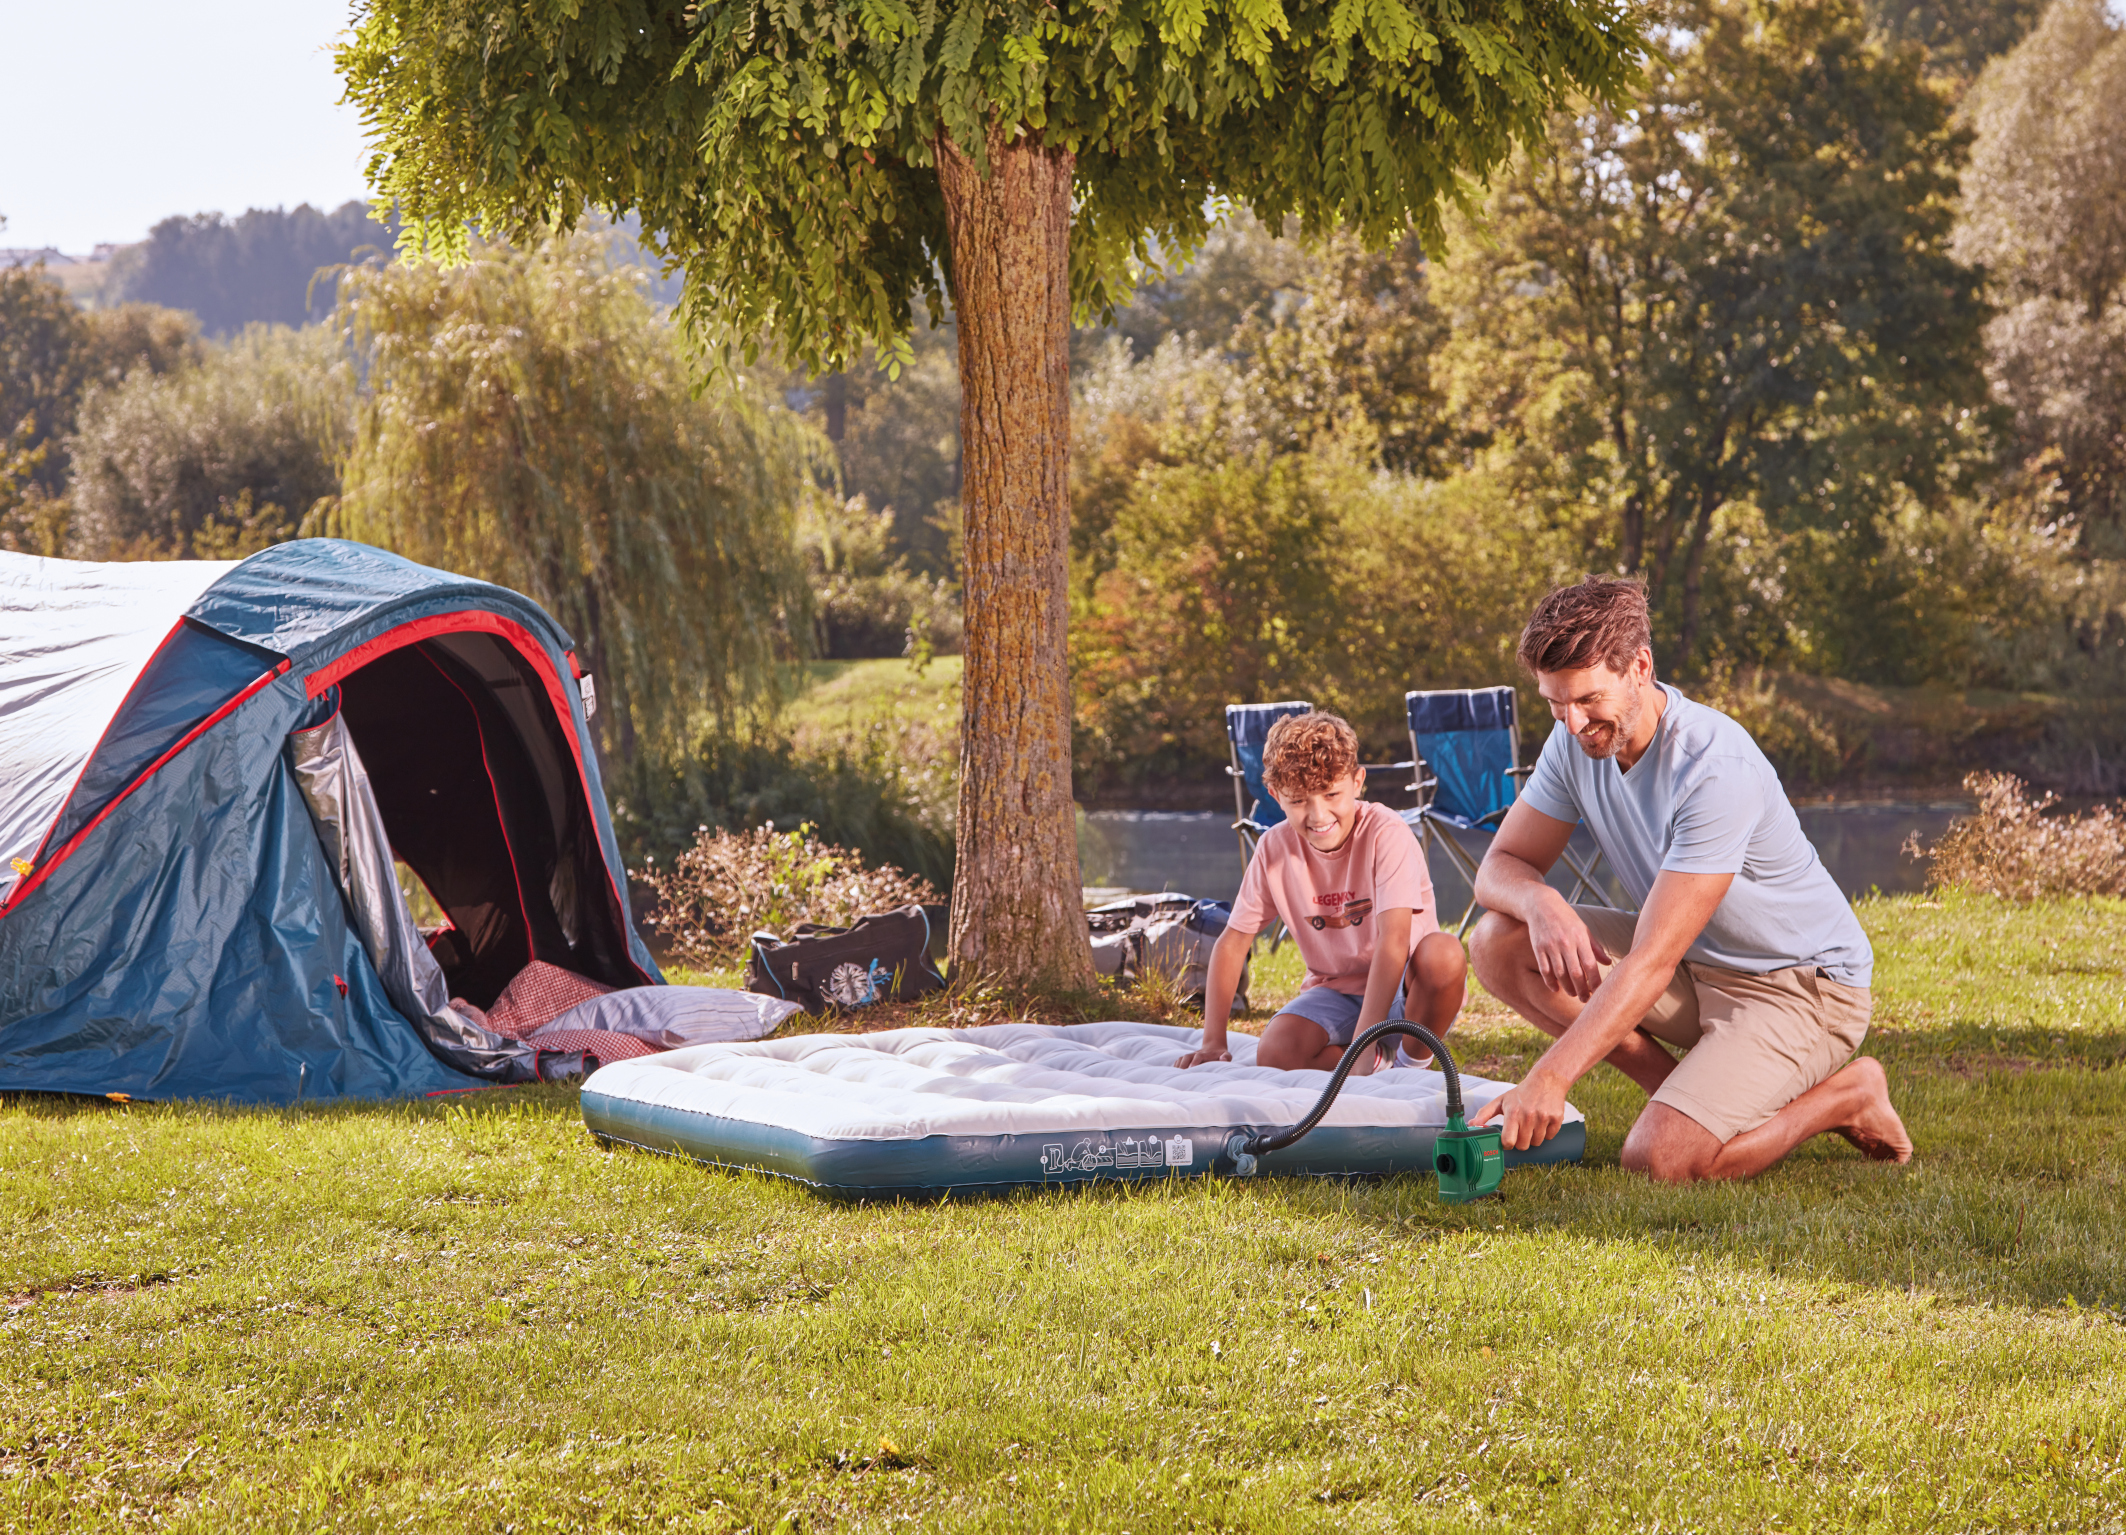 Bosch EasyInflate 18V-500 for leisure equipment: Practical hose for convenient inflation